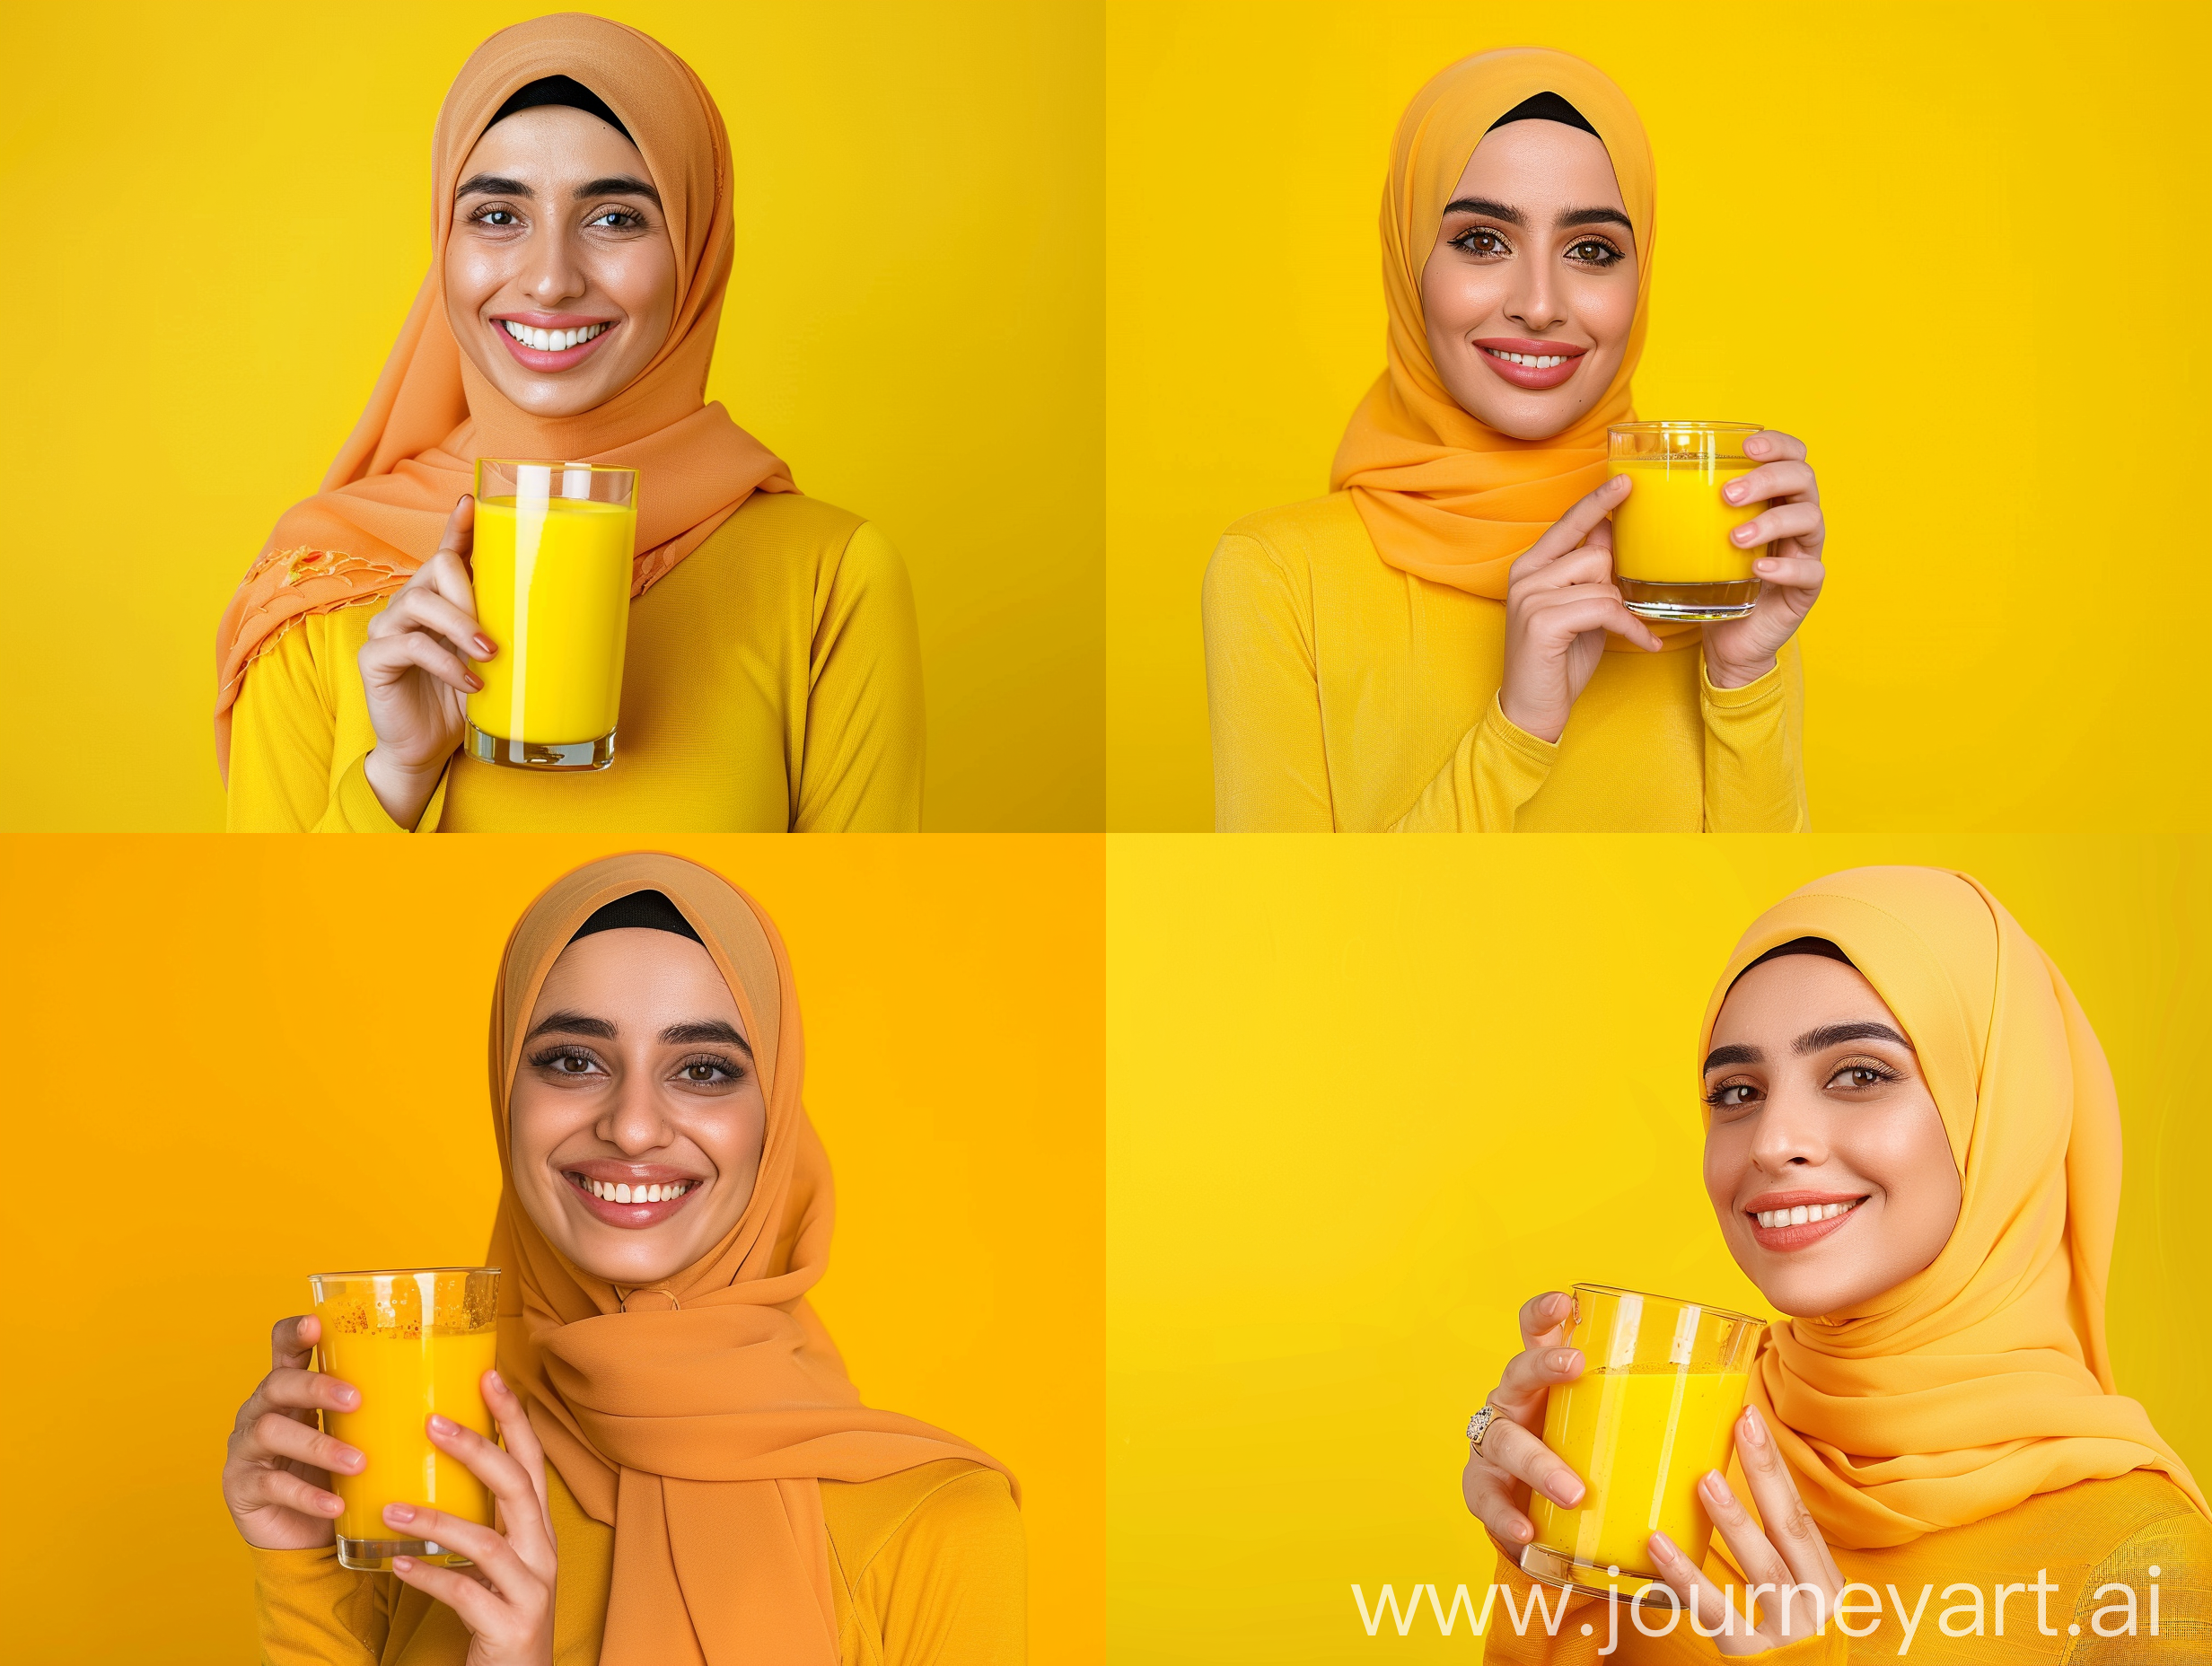 Studio photo with a bright yellow background of an Arab woman holding a glass of turmeric milk.